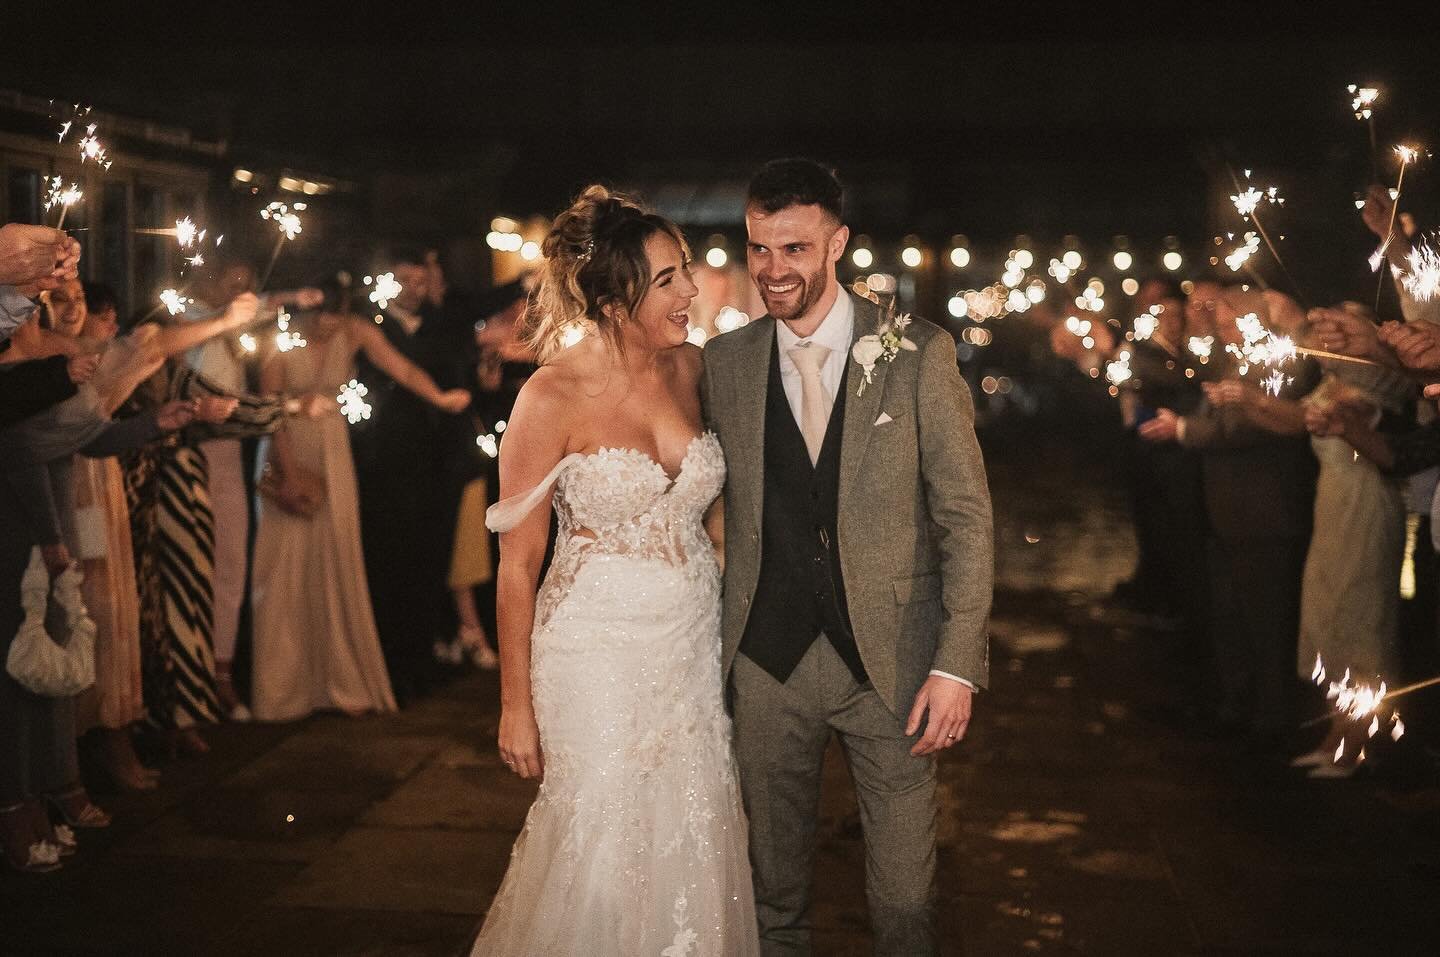 A snippet of Gemma &amp; Joe&rsquo;s day last week at Foxtail Barns
.
These two had such an amazing wedding, and kept the smiles up all day long (despite rain for a lot of their day!!). Fortunately foxtail barns has a lovely orangery; perfect for tho